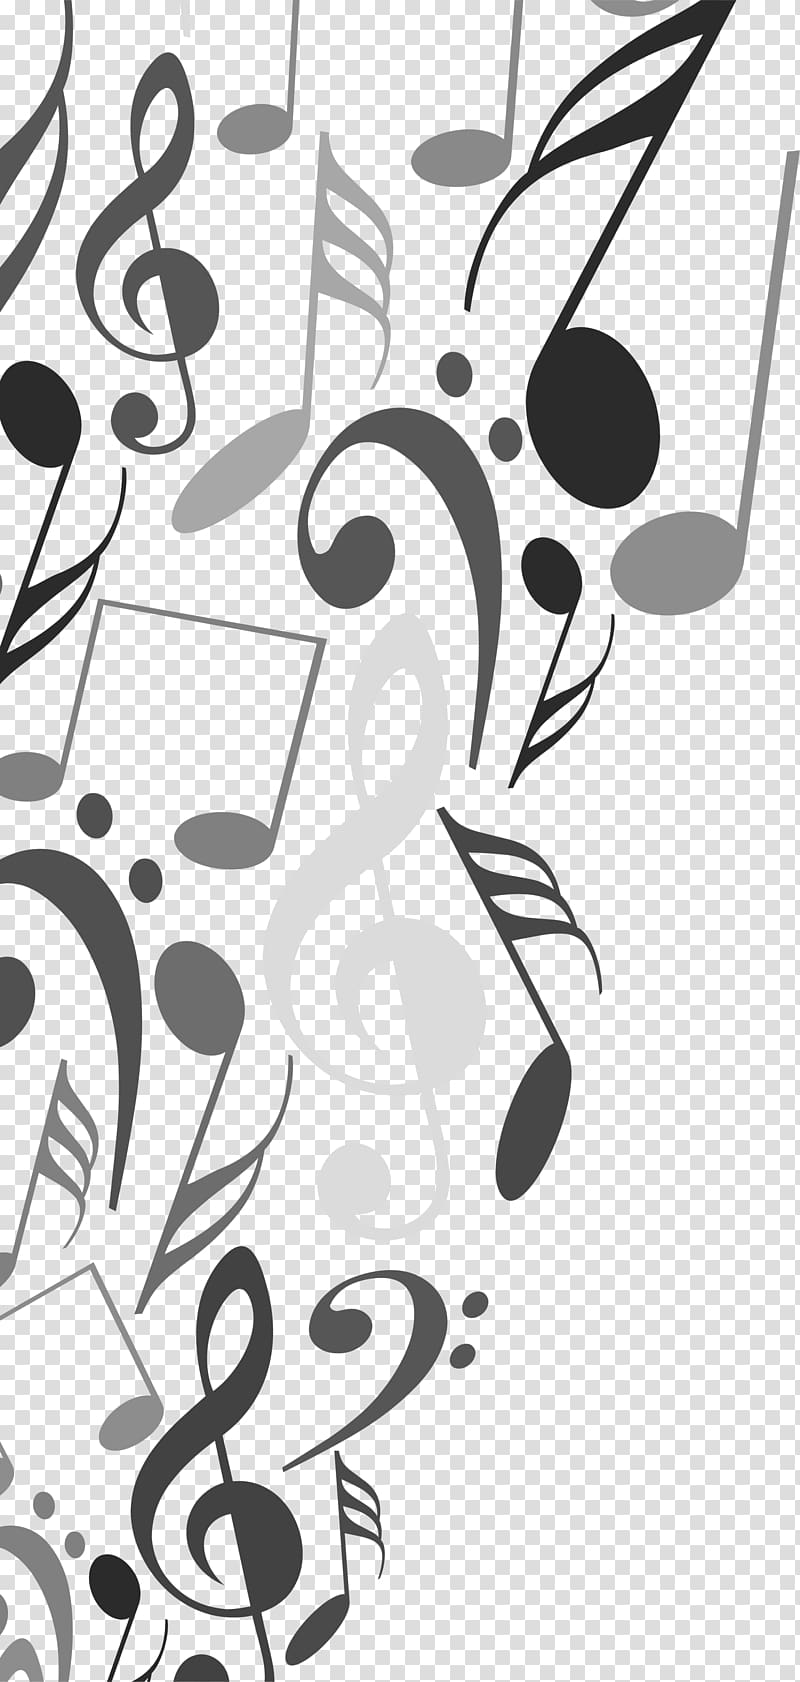 G-clef and note print illustration, Background music Music Illustration, Black notes background transparent background PNG clipart